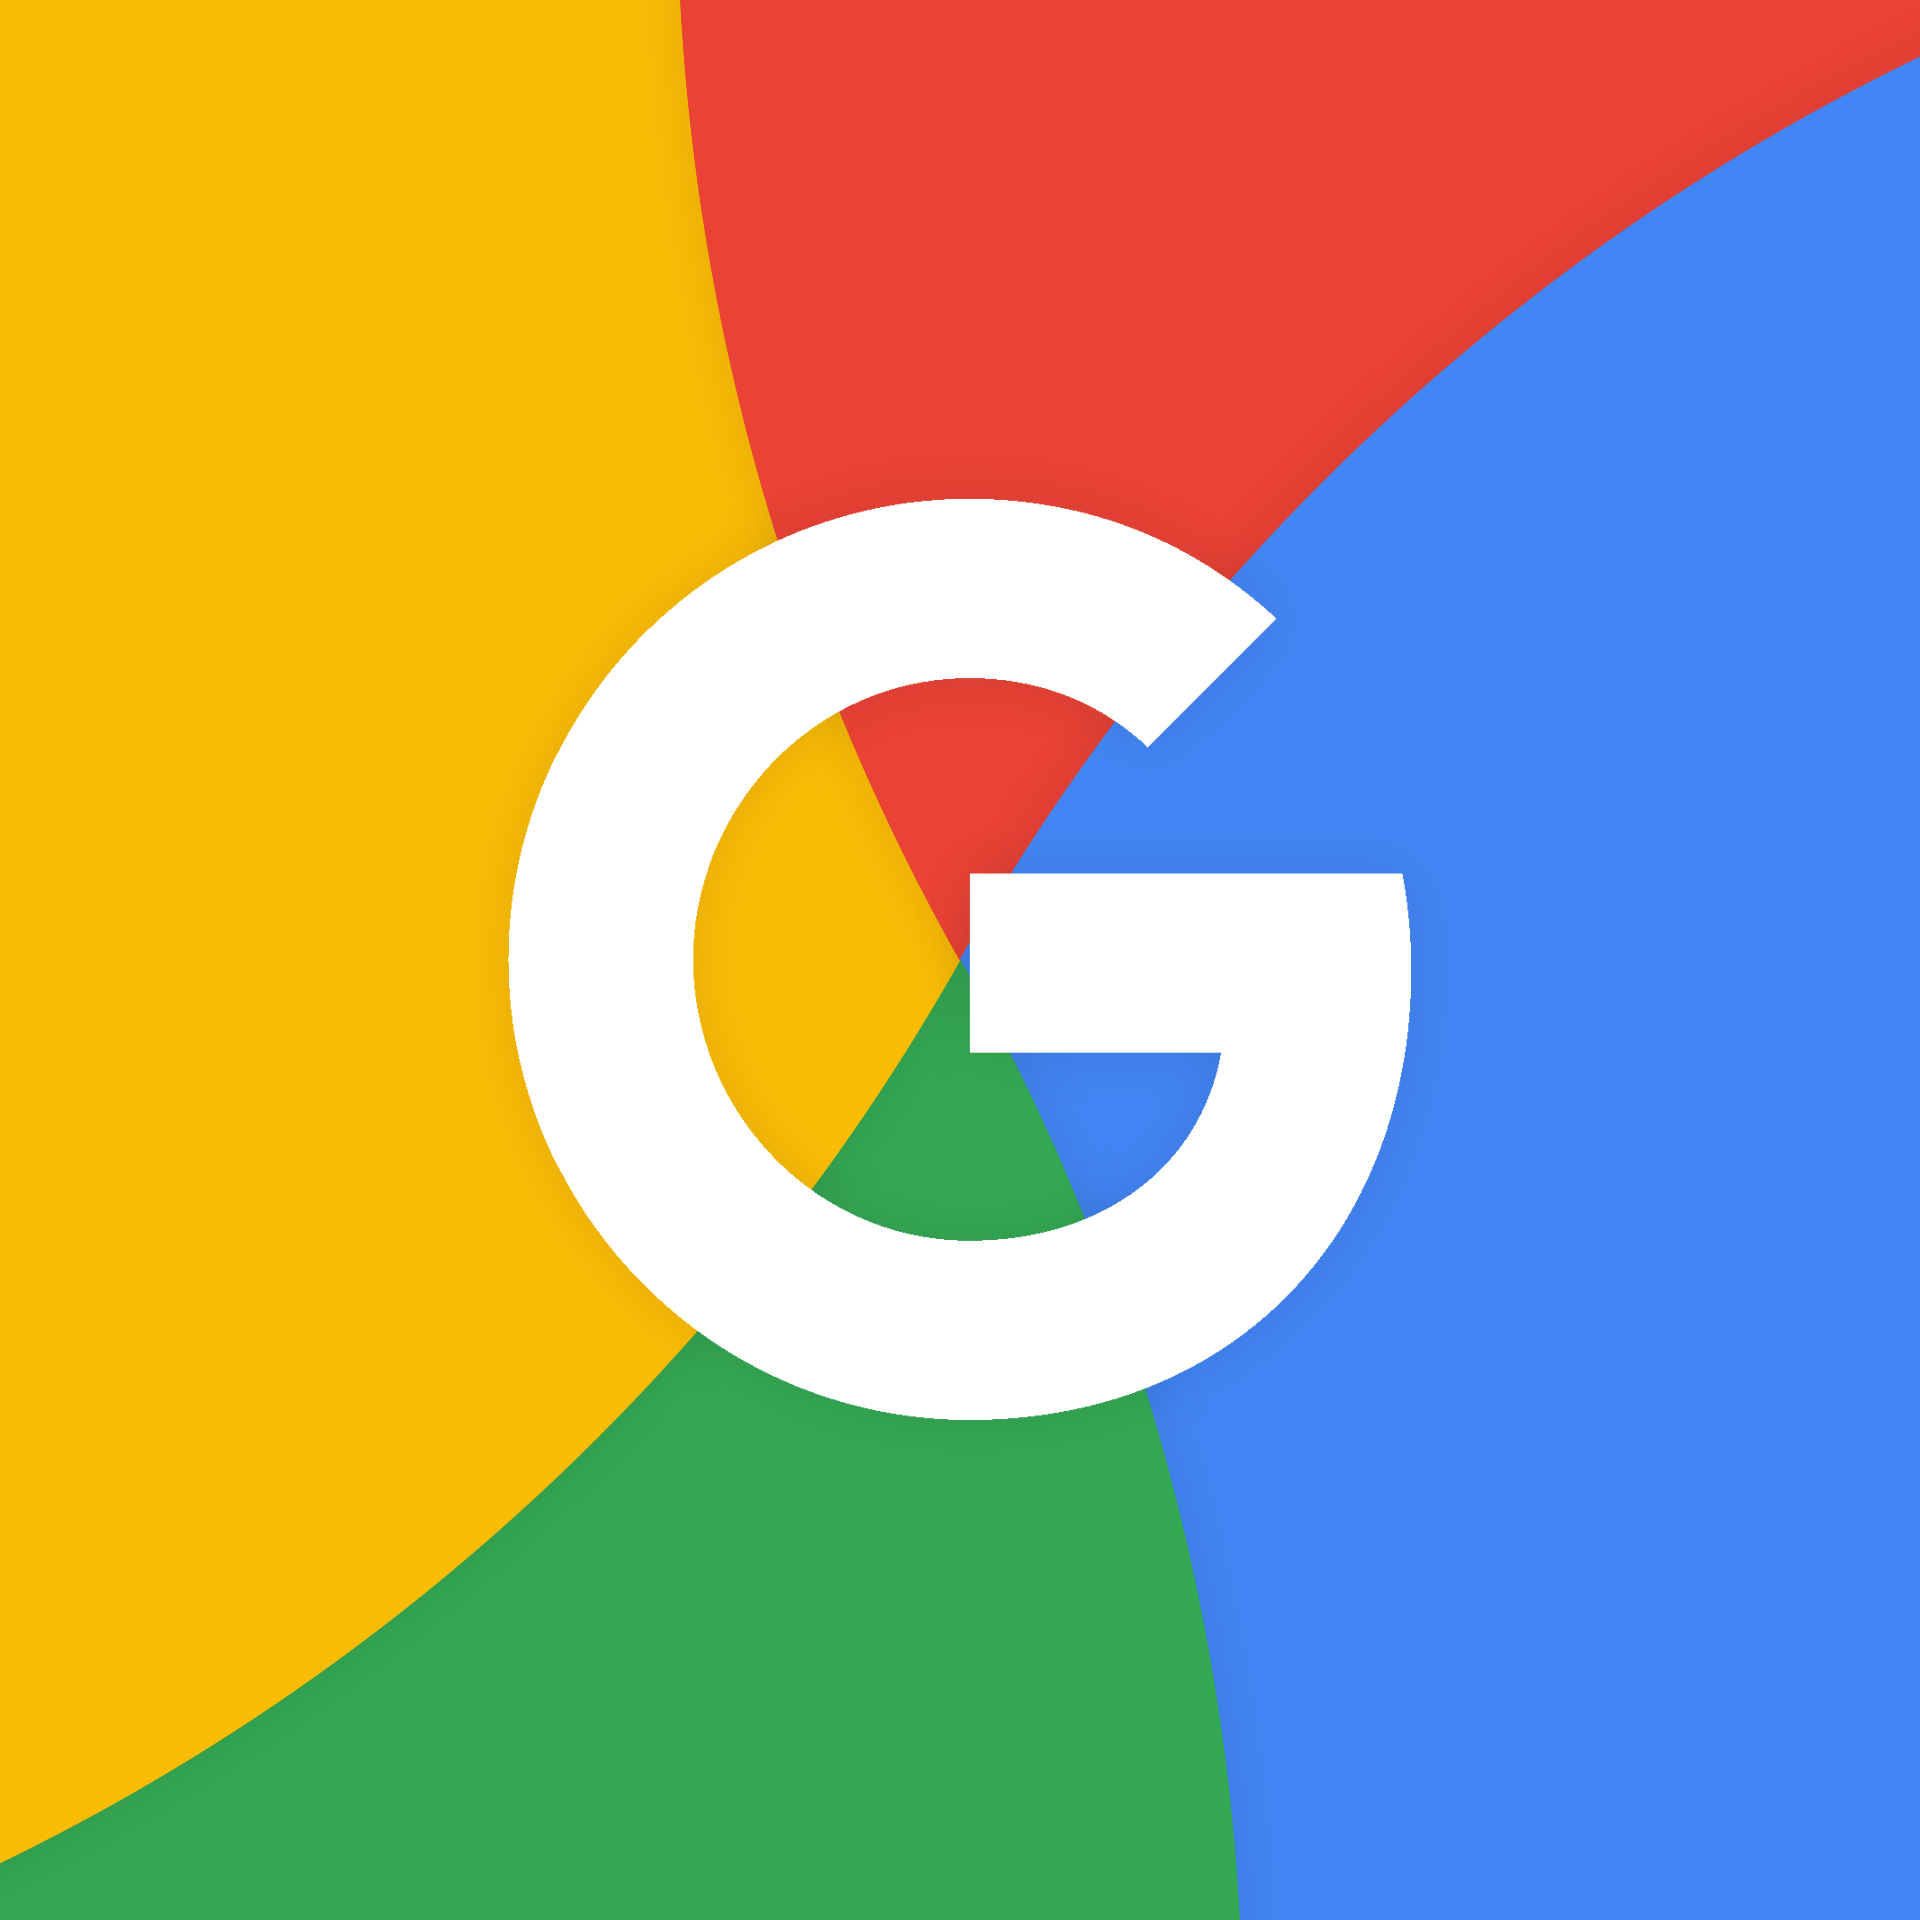 General 1920x1920 Google technology logo colorful Browser Software brand